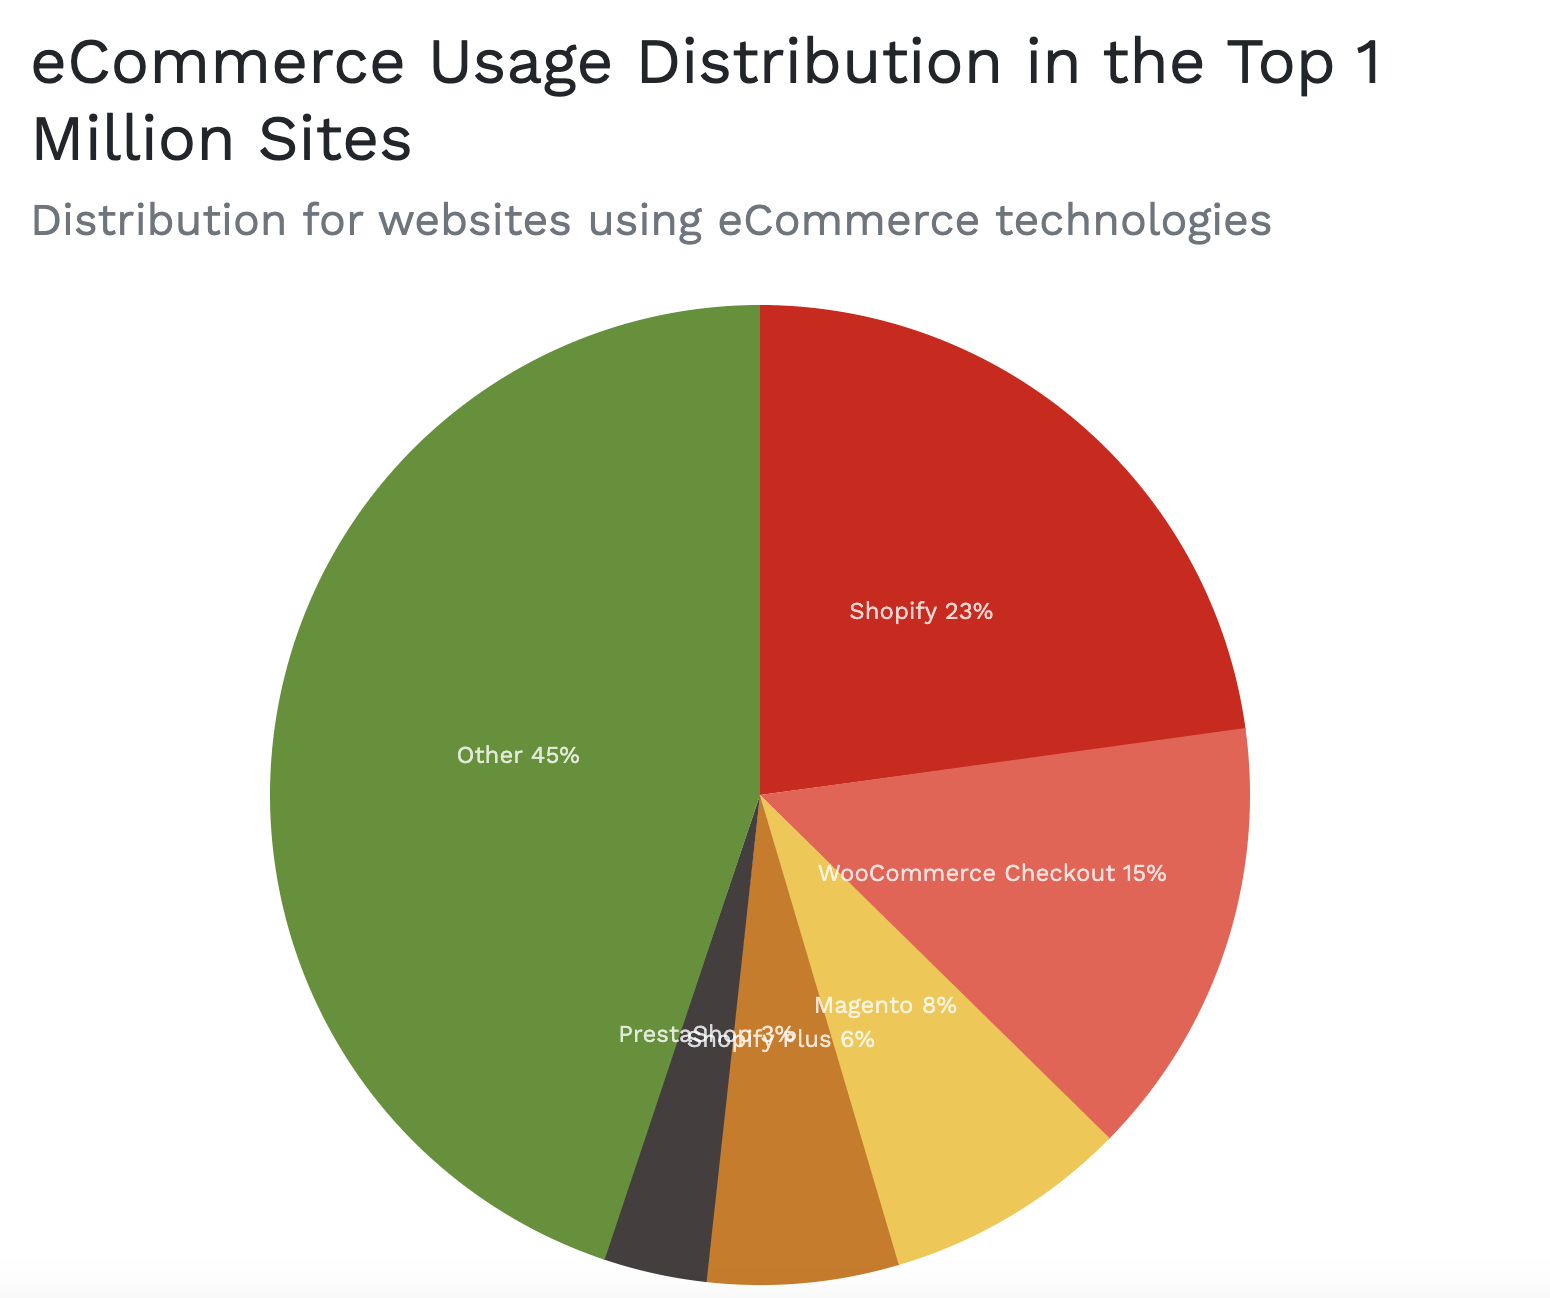 Shopify is the most used ecommerce platform -  